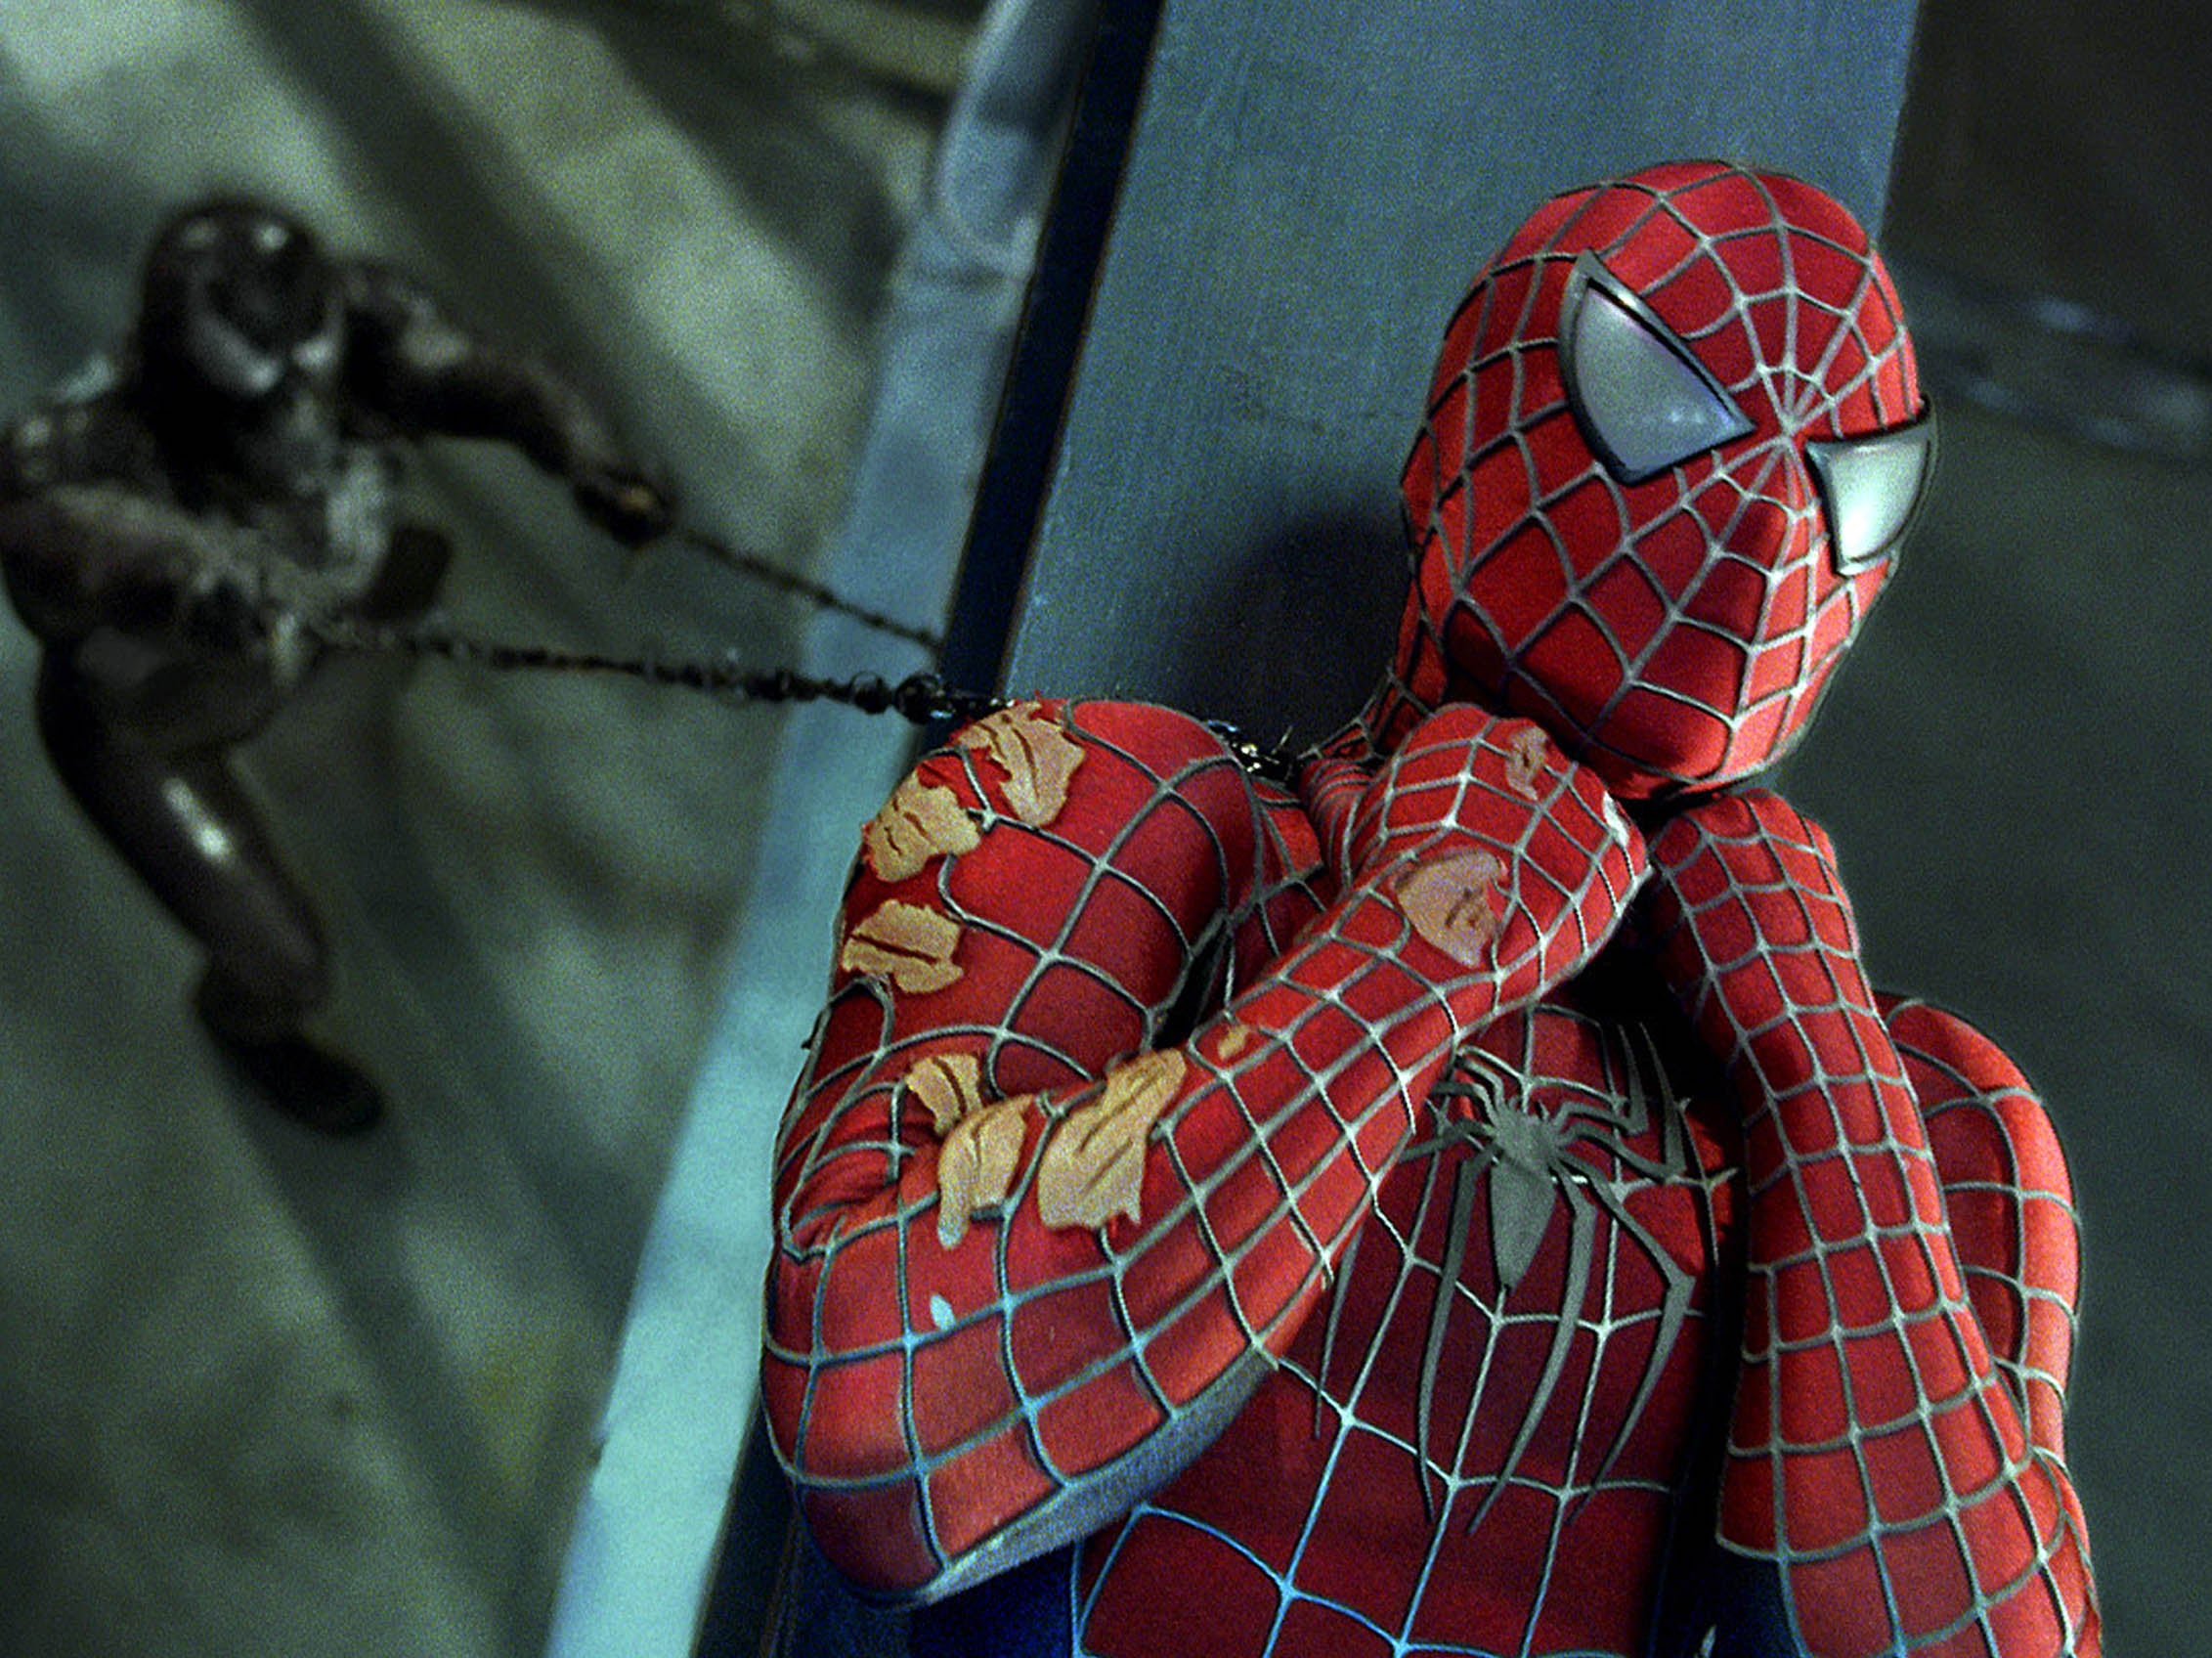 ‘Spider-Man 3’ saw Peter Parker face up against three separate supervillains